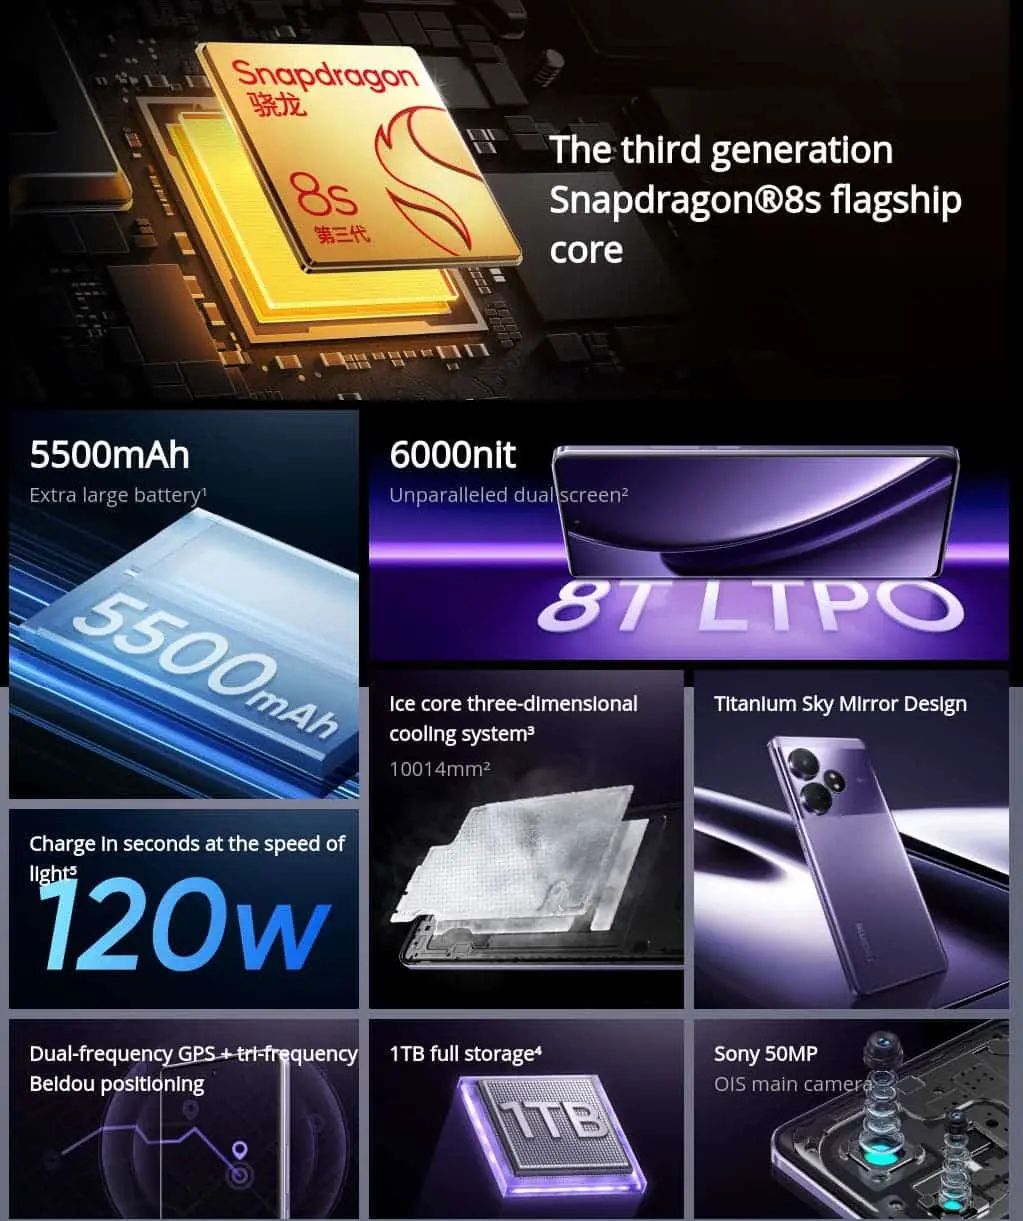 Powerful Snapdragon 8s Gen 3 chipset, up to 16GB RAM, and 1TB storage 